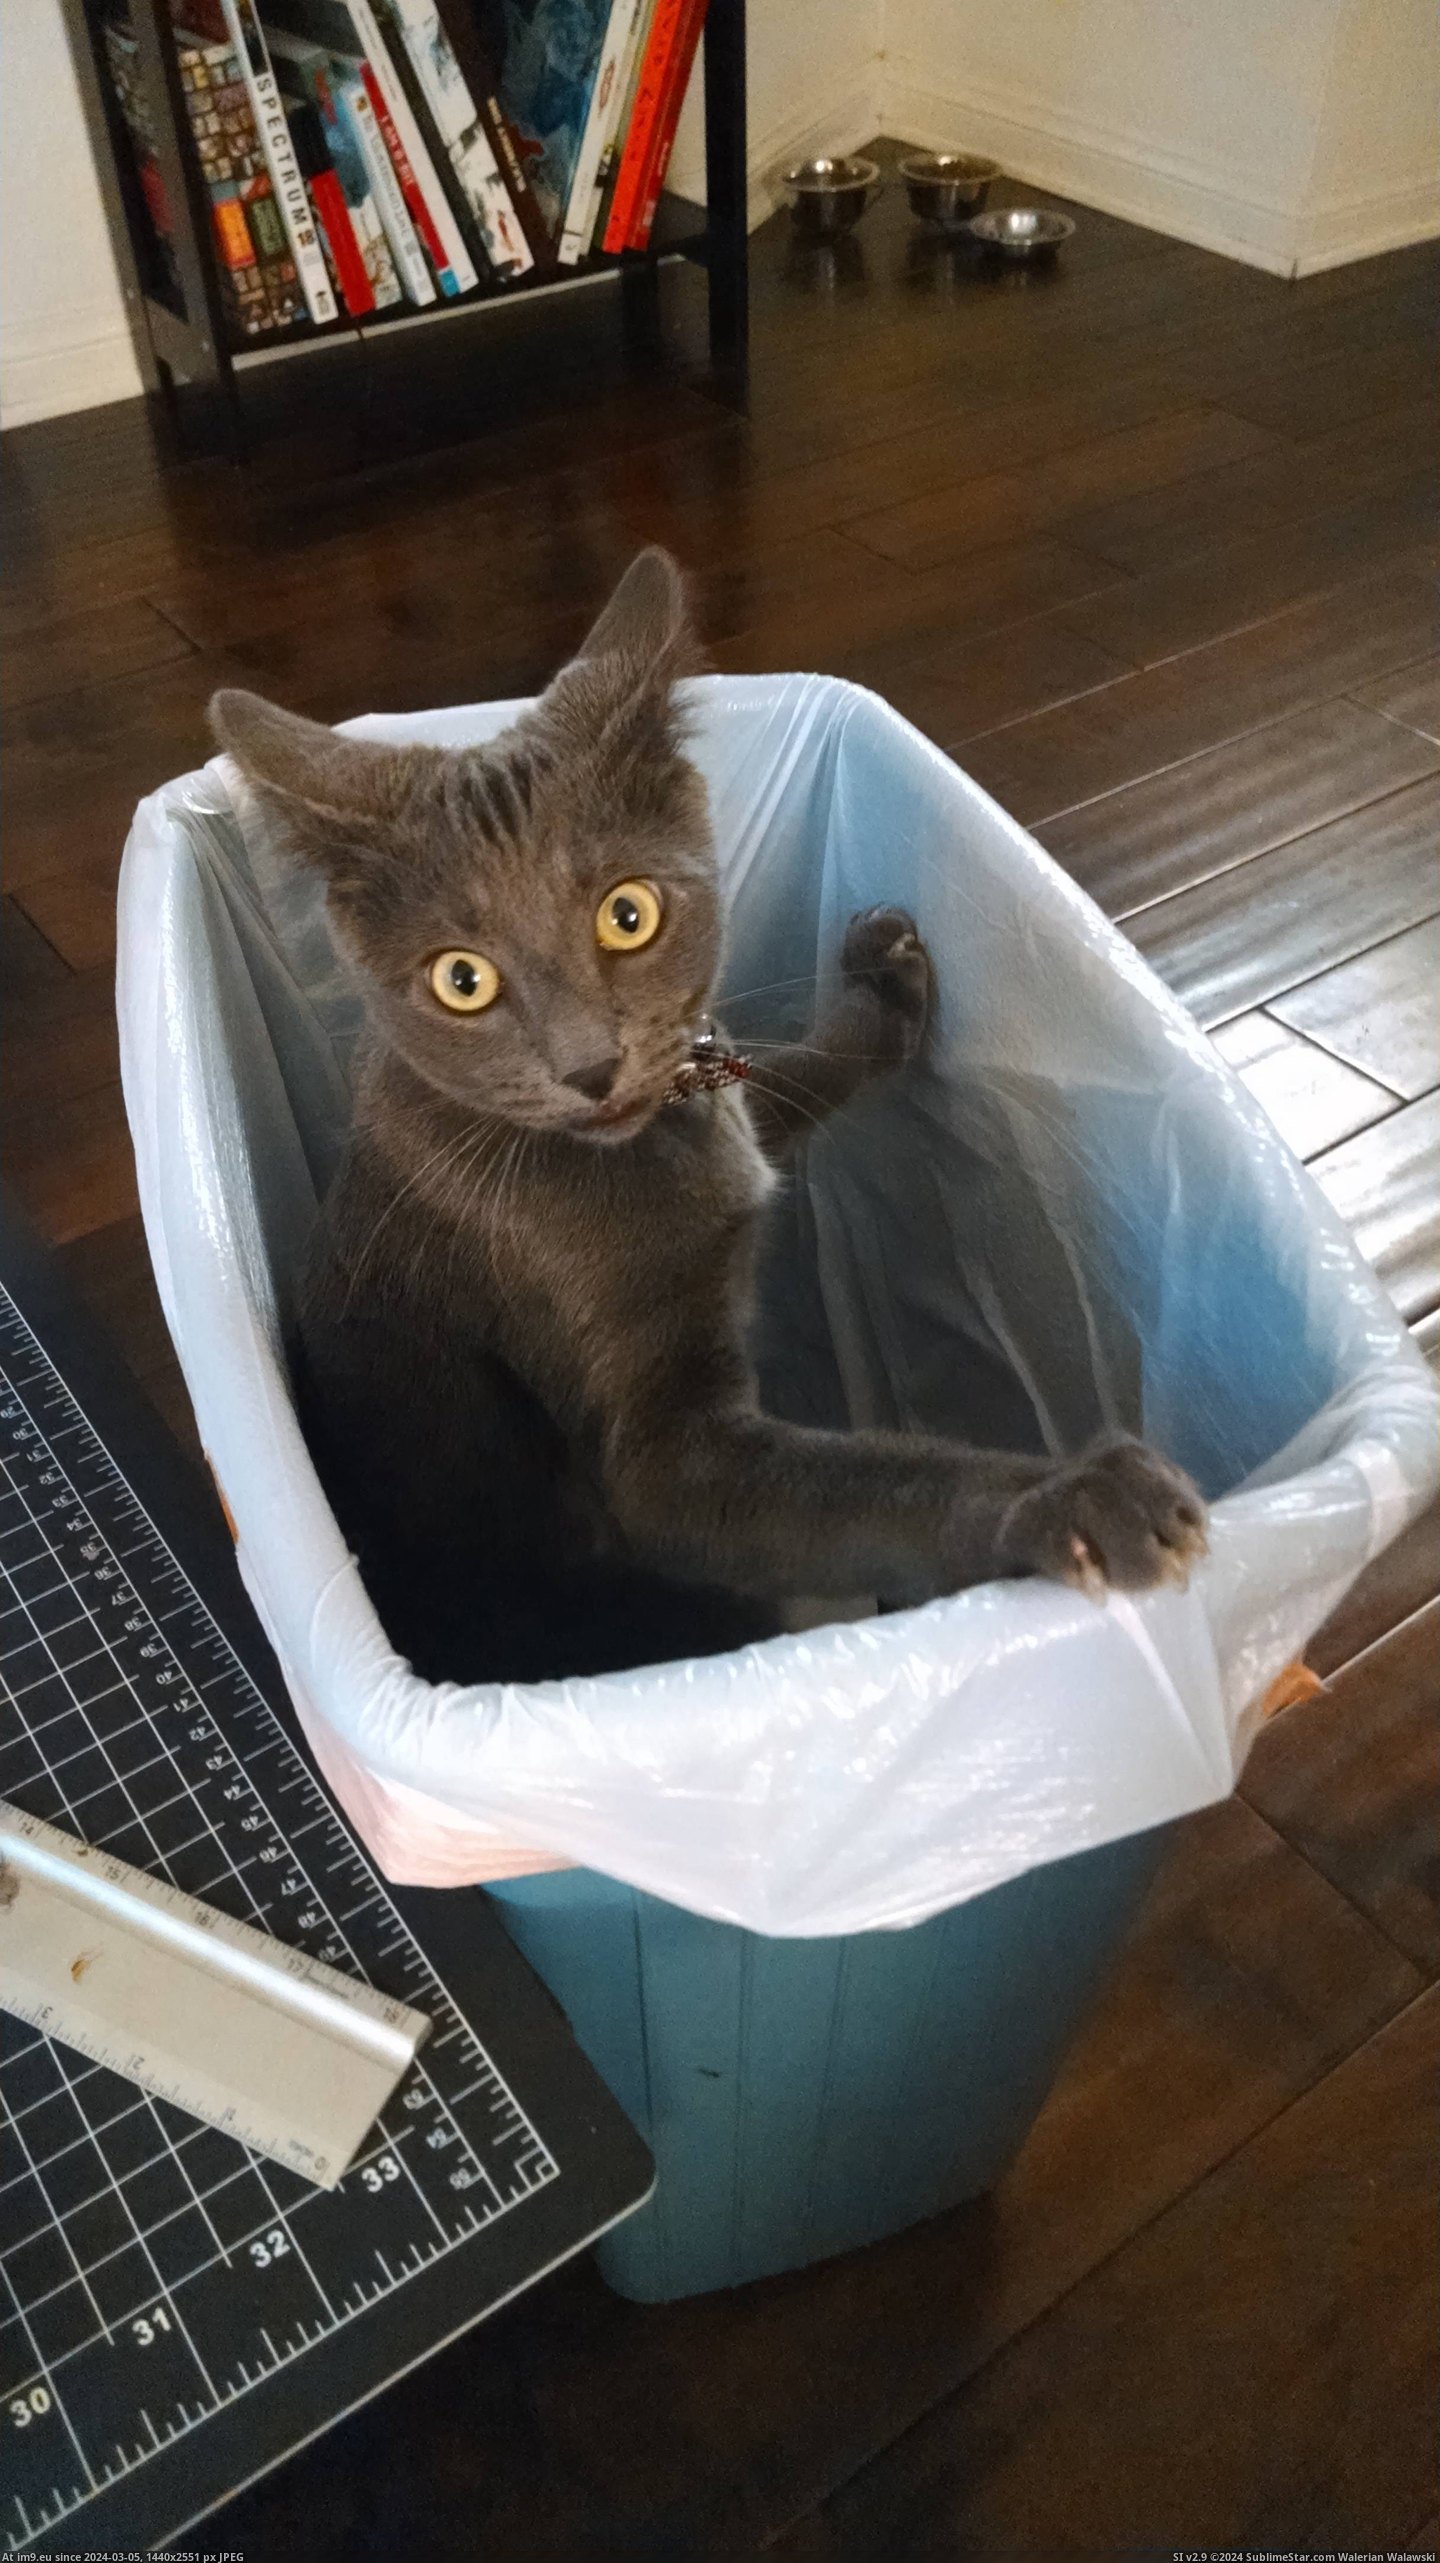 #Cats #Digging #Trash #Caught [Cats] Someone got caught trash digging Pic. (Image of album My r/CATS favs))